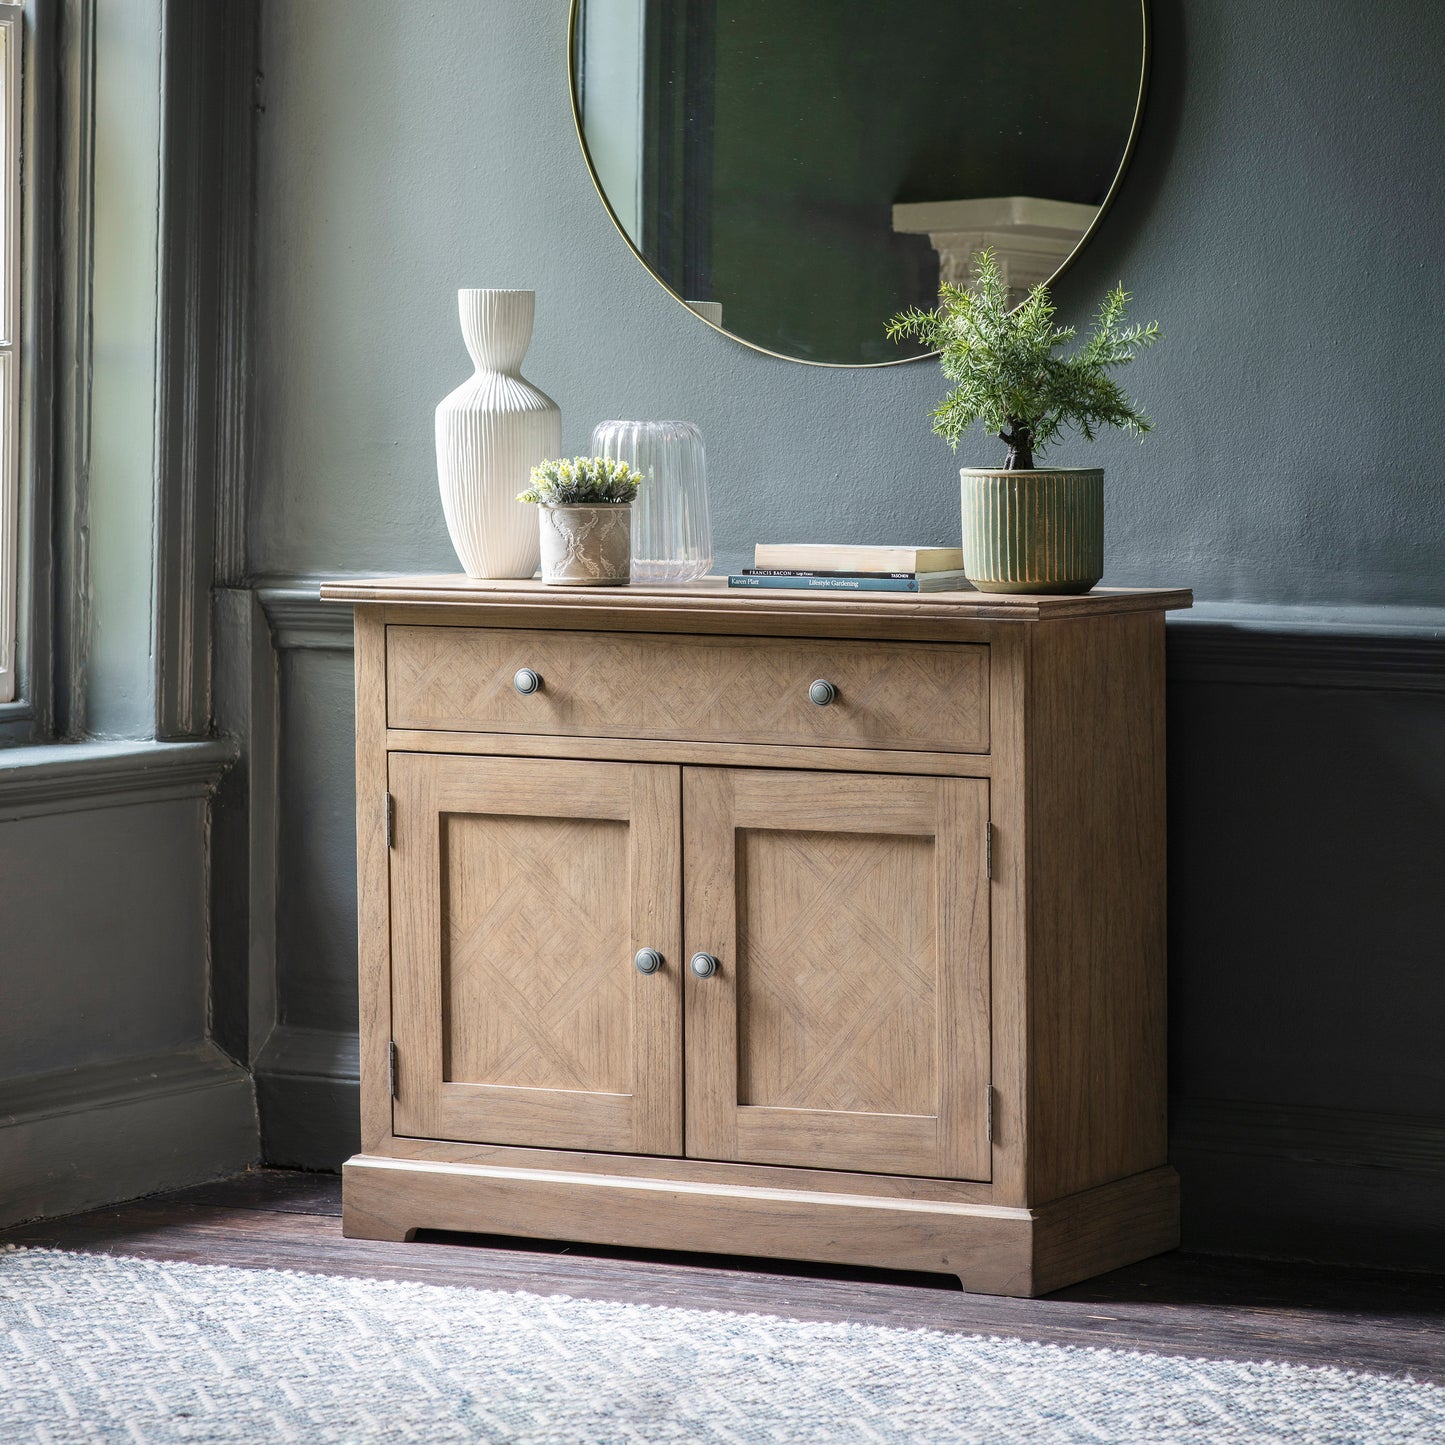 A home furniture sideboard with mirror from Kikiathome.co.uk.